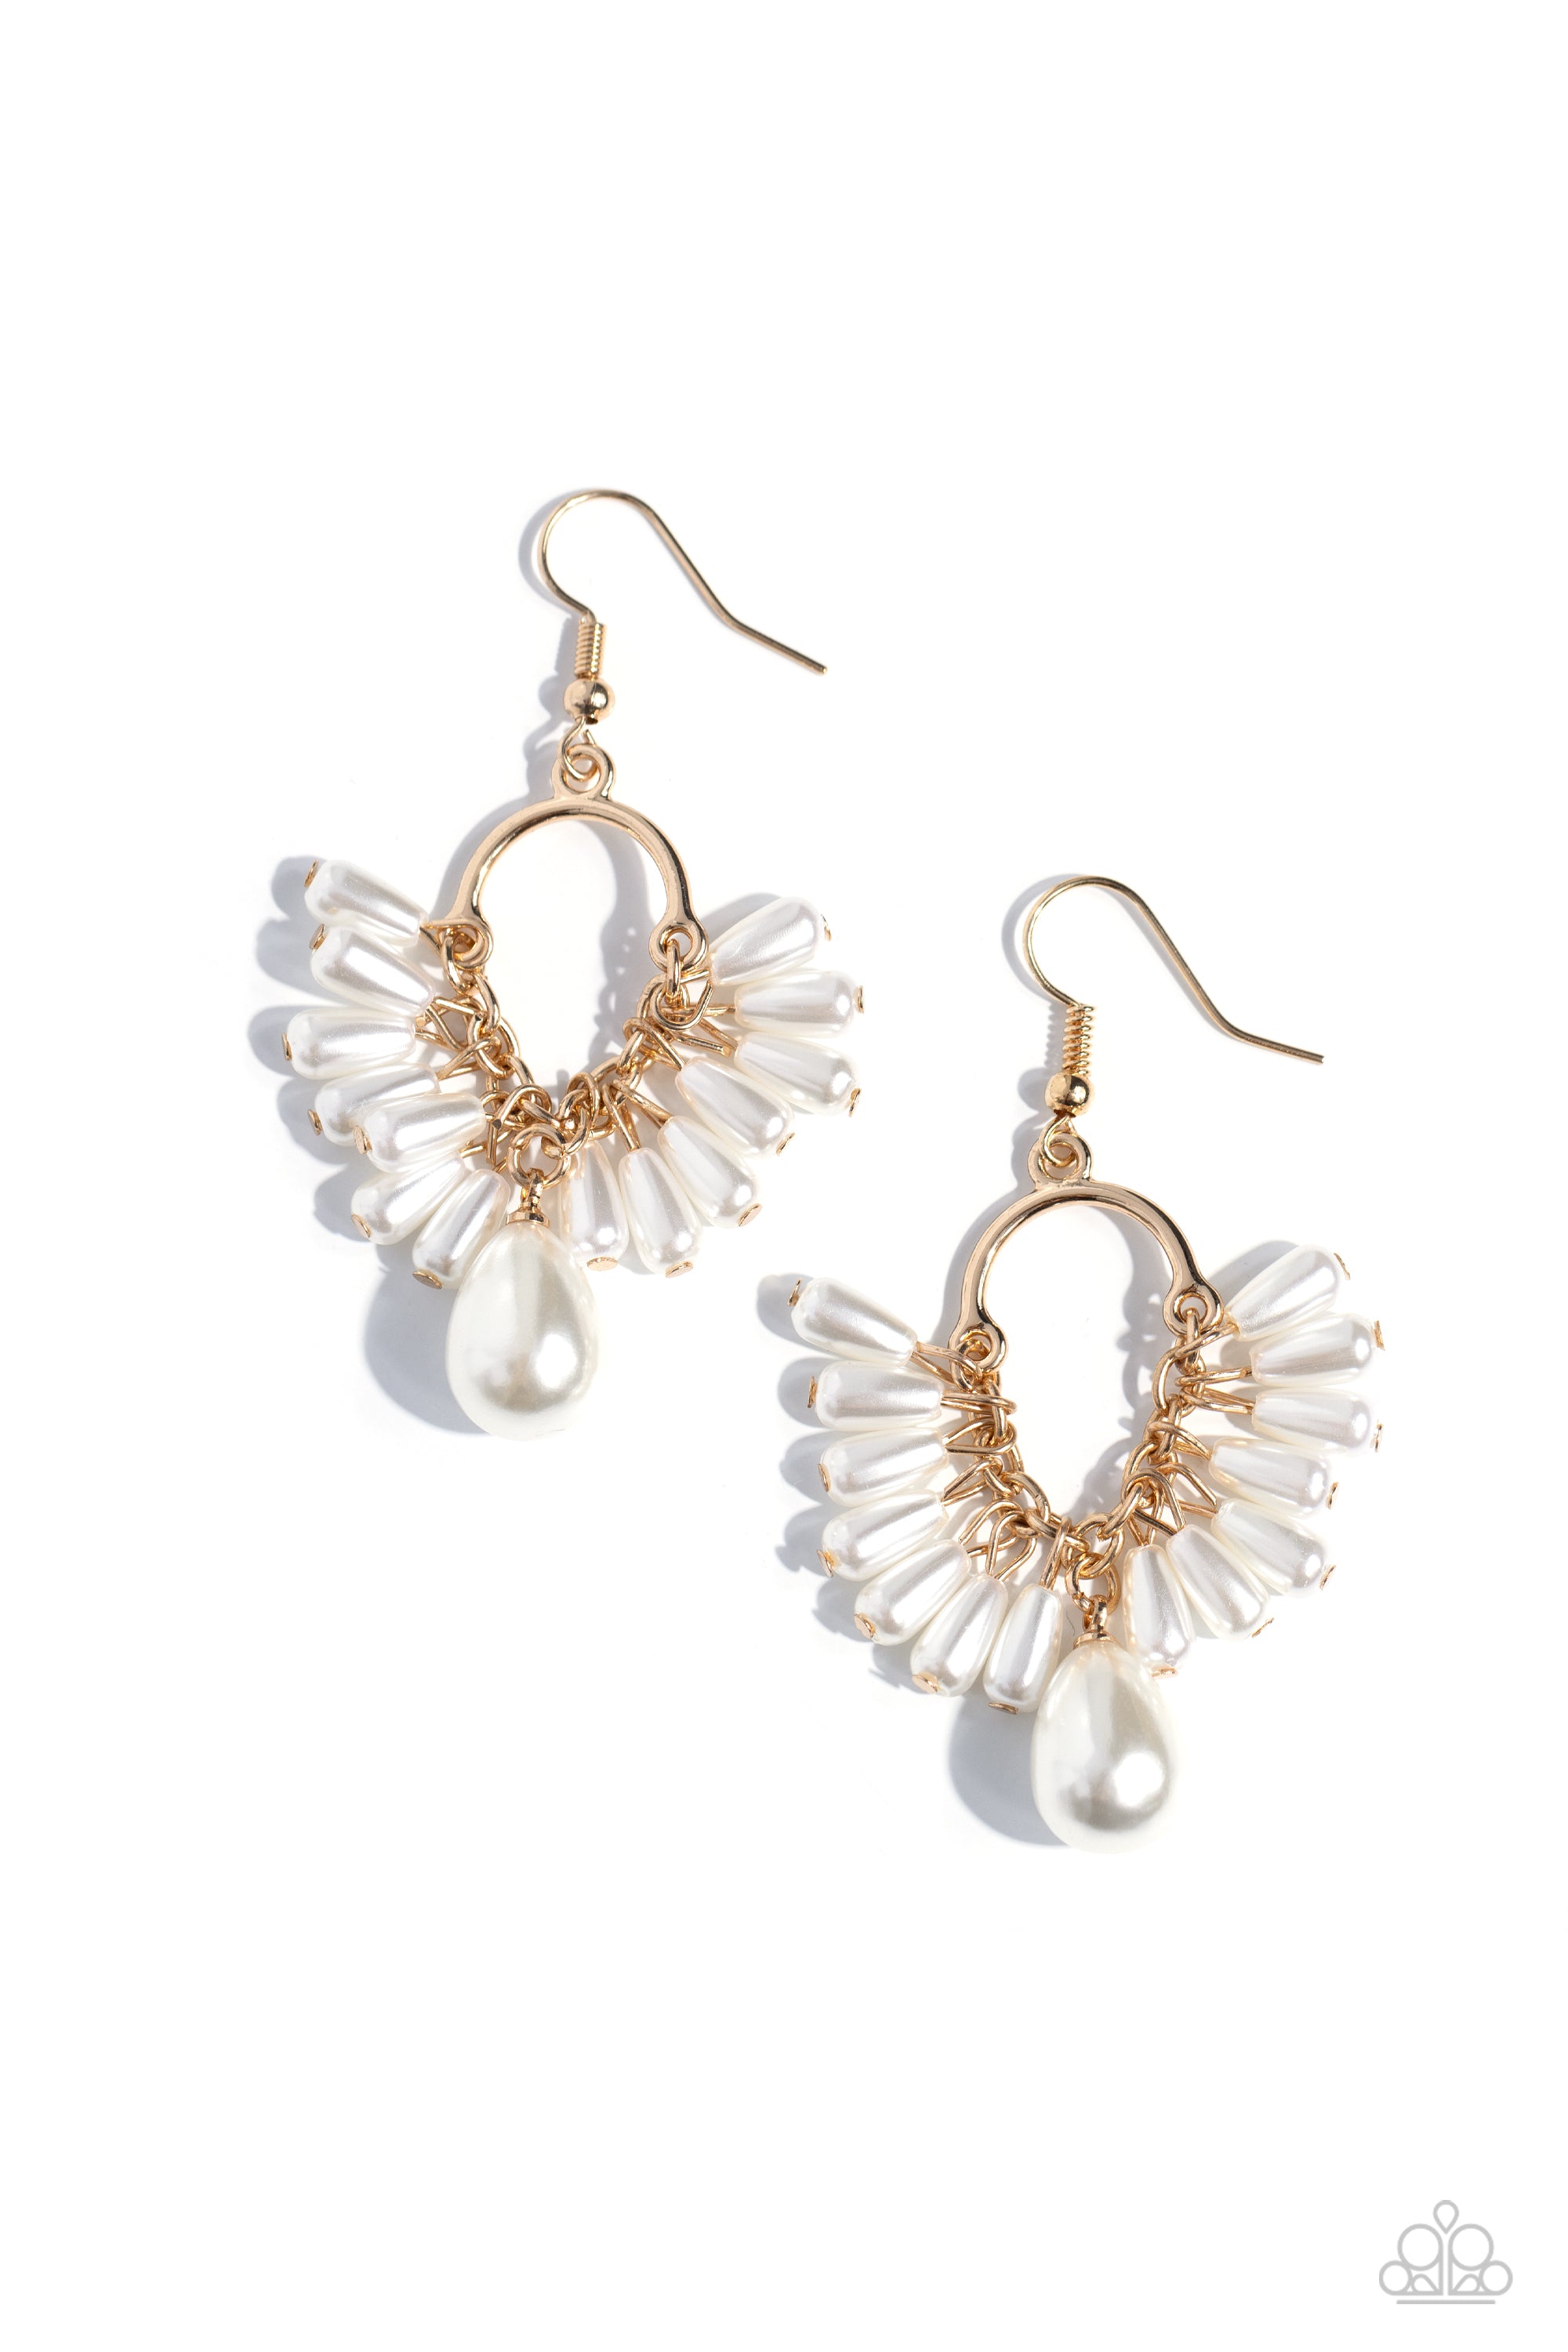 AHOY THERE! GOLD-EARRINGS